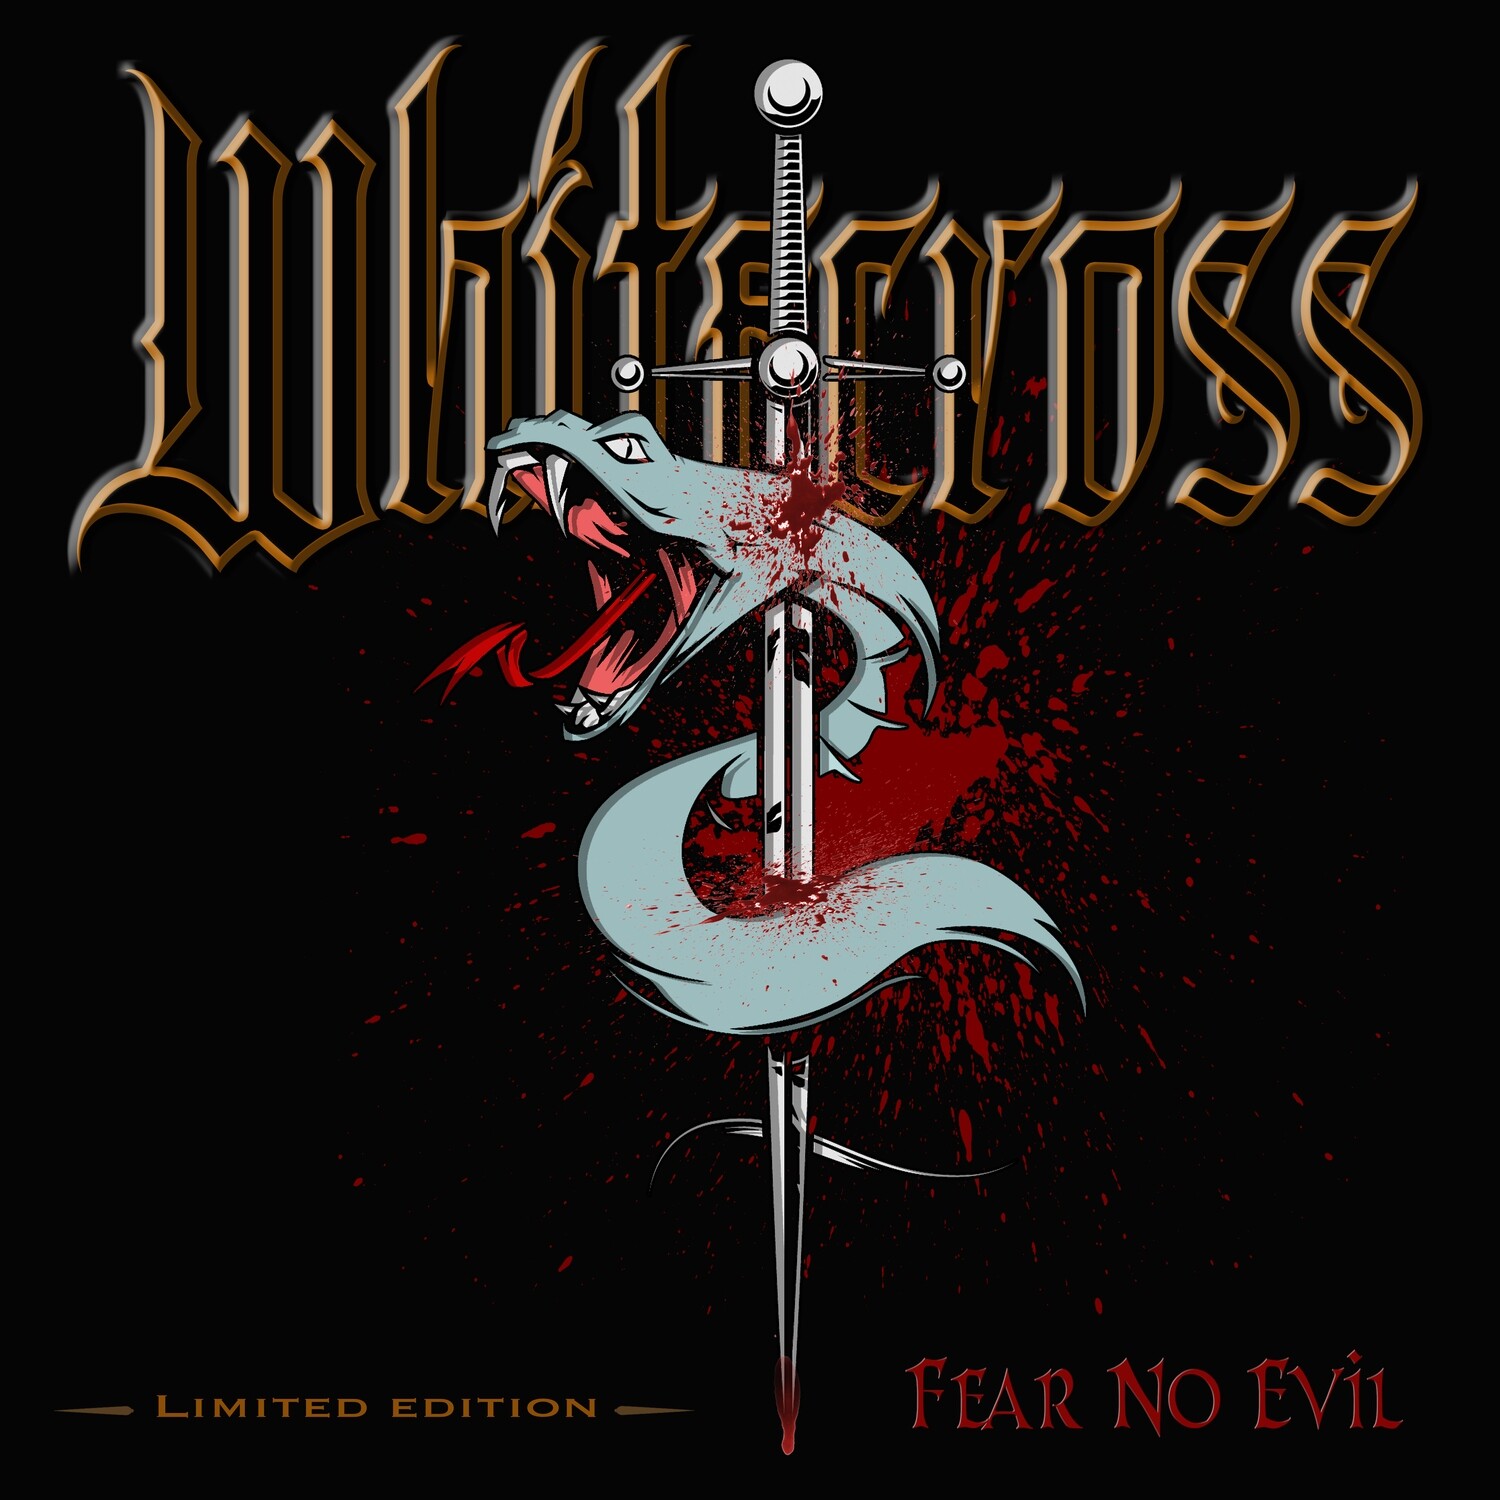 Fear No Evil by Whitecross [CD] SOLD OUT